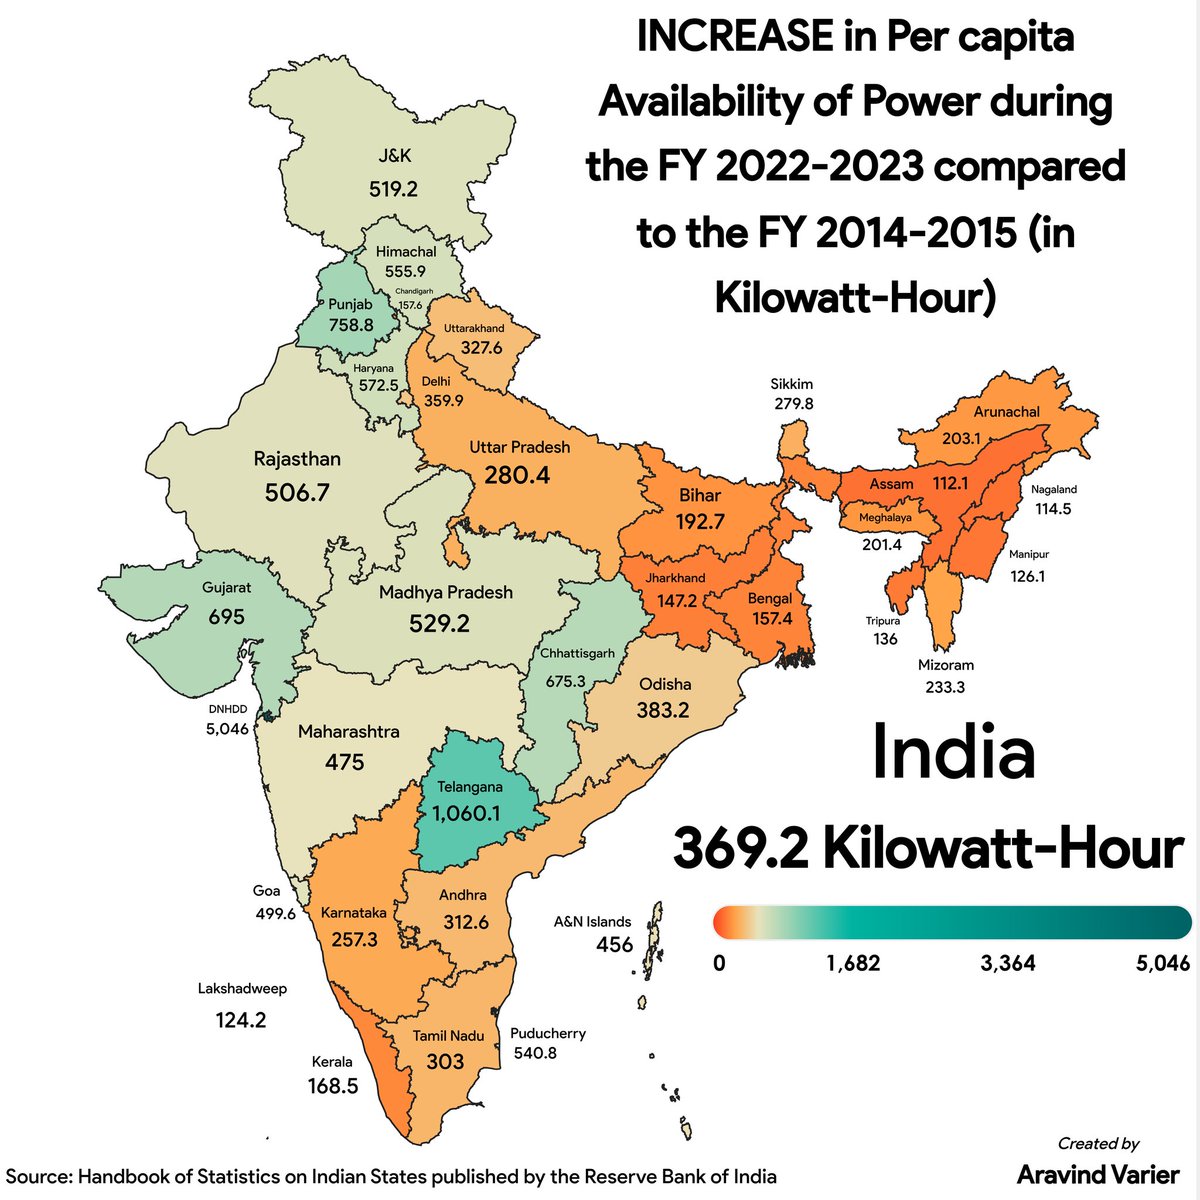 INCREASE in Per capita Availability of Power during the FY 2022-2023 compared to the FY 2014-2015 (in Kilowatt-Hour)